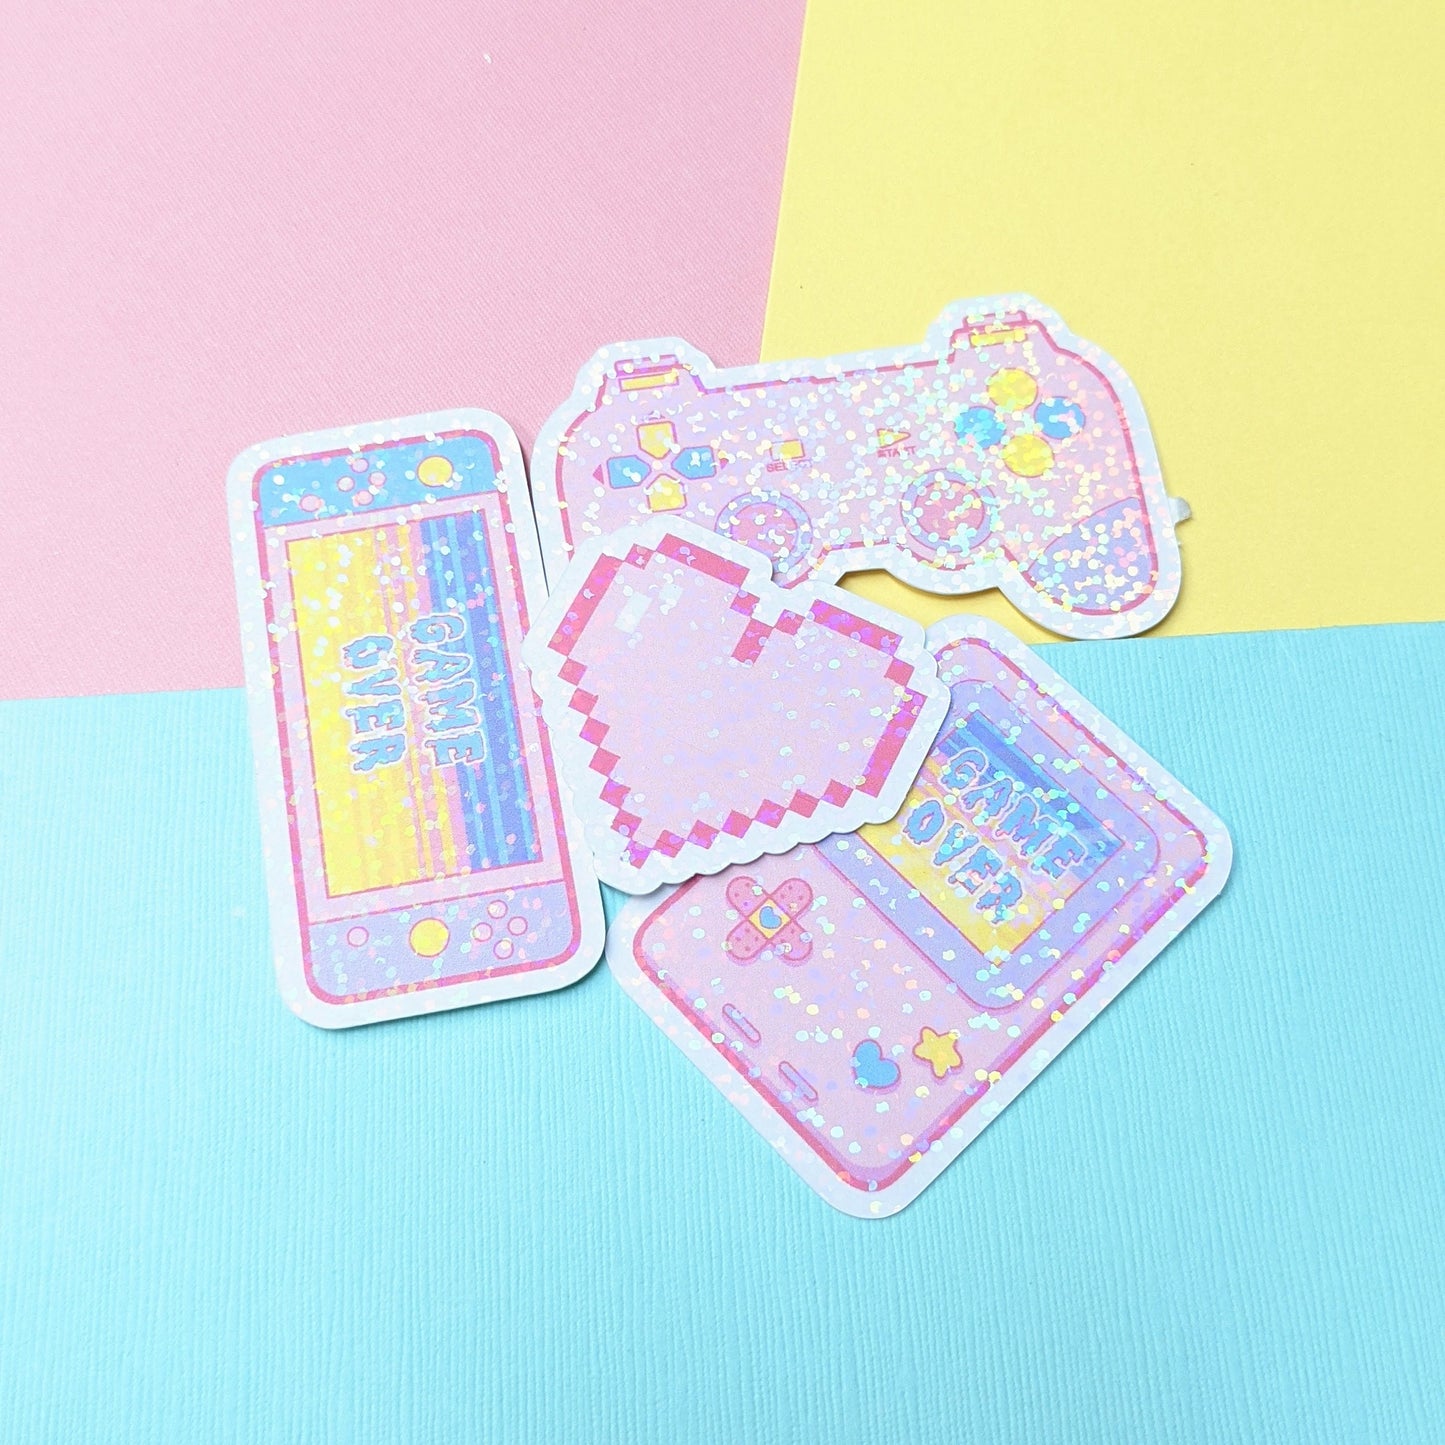 Video Game Holographic Sticker Pack (4)